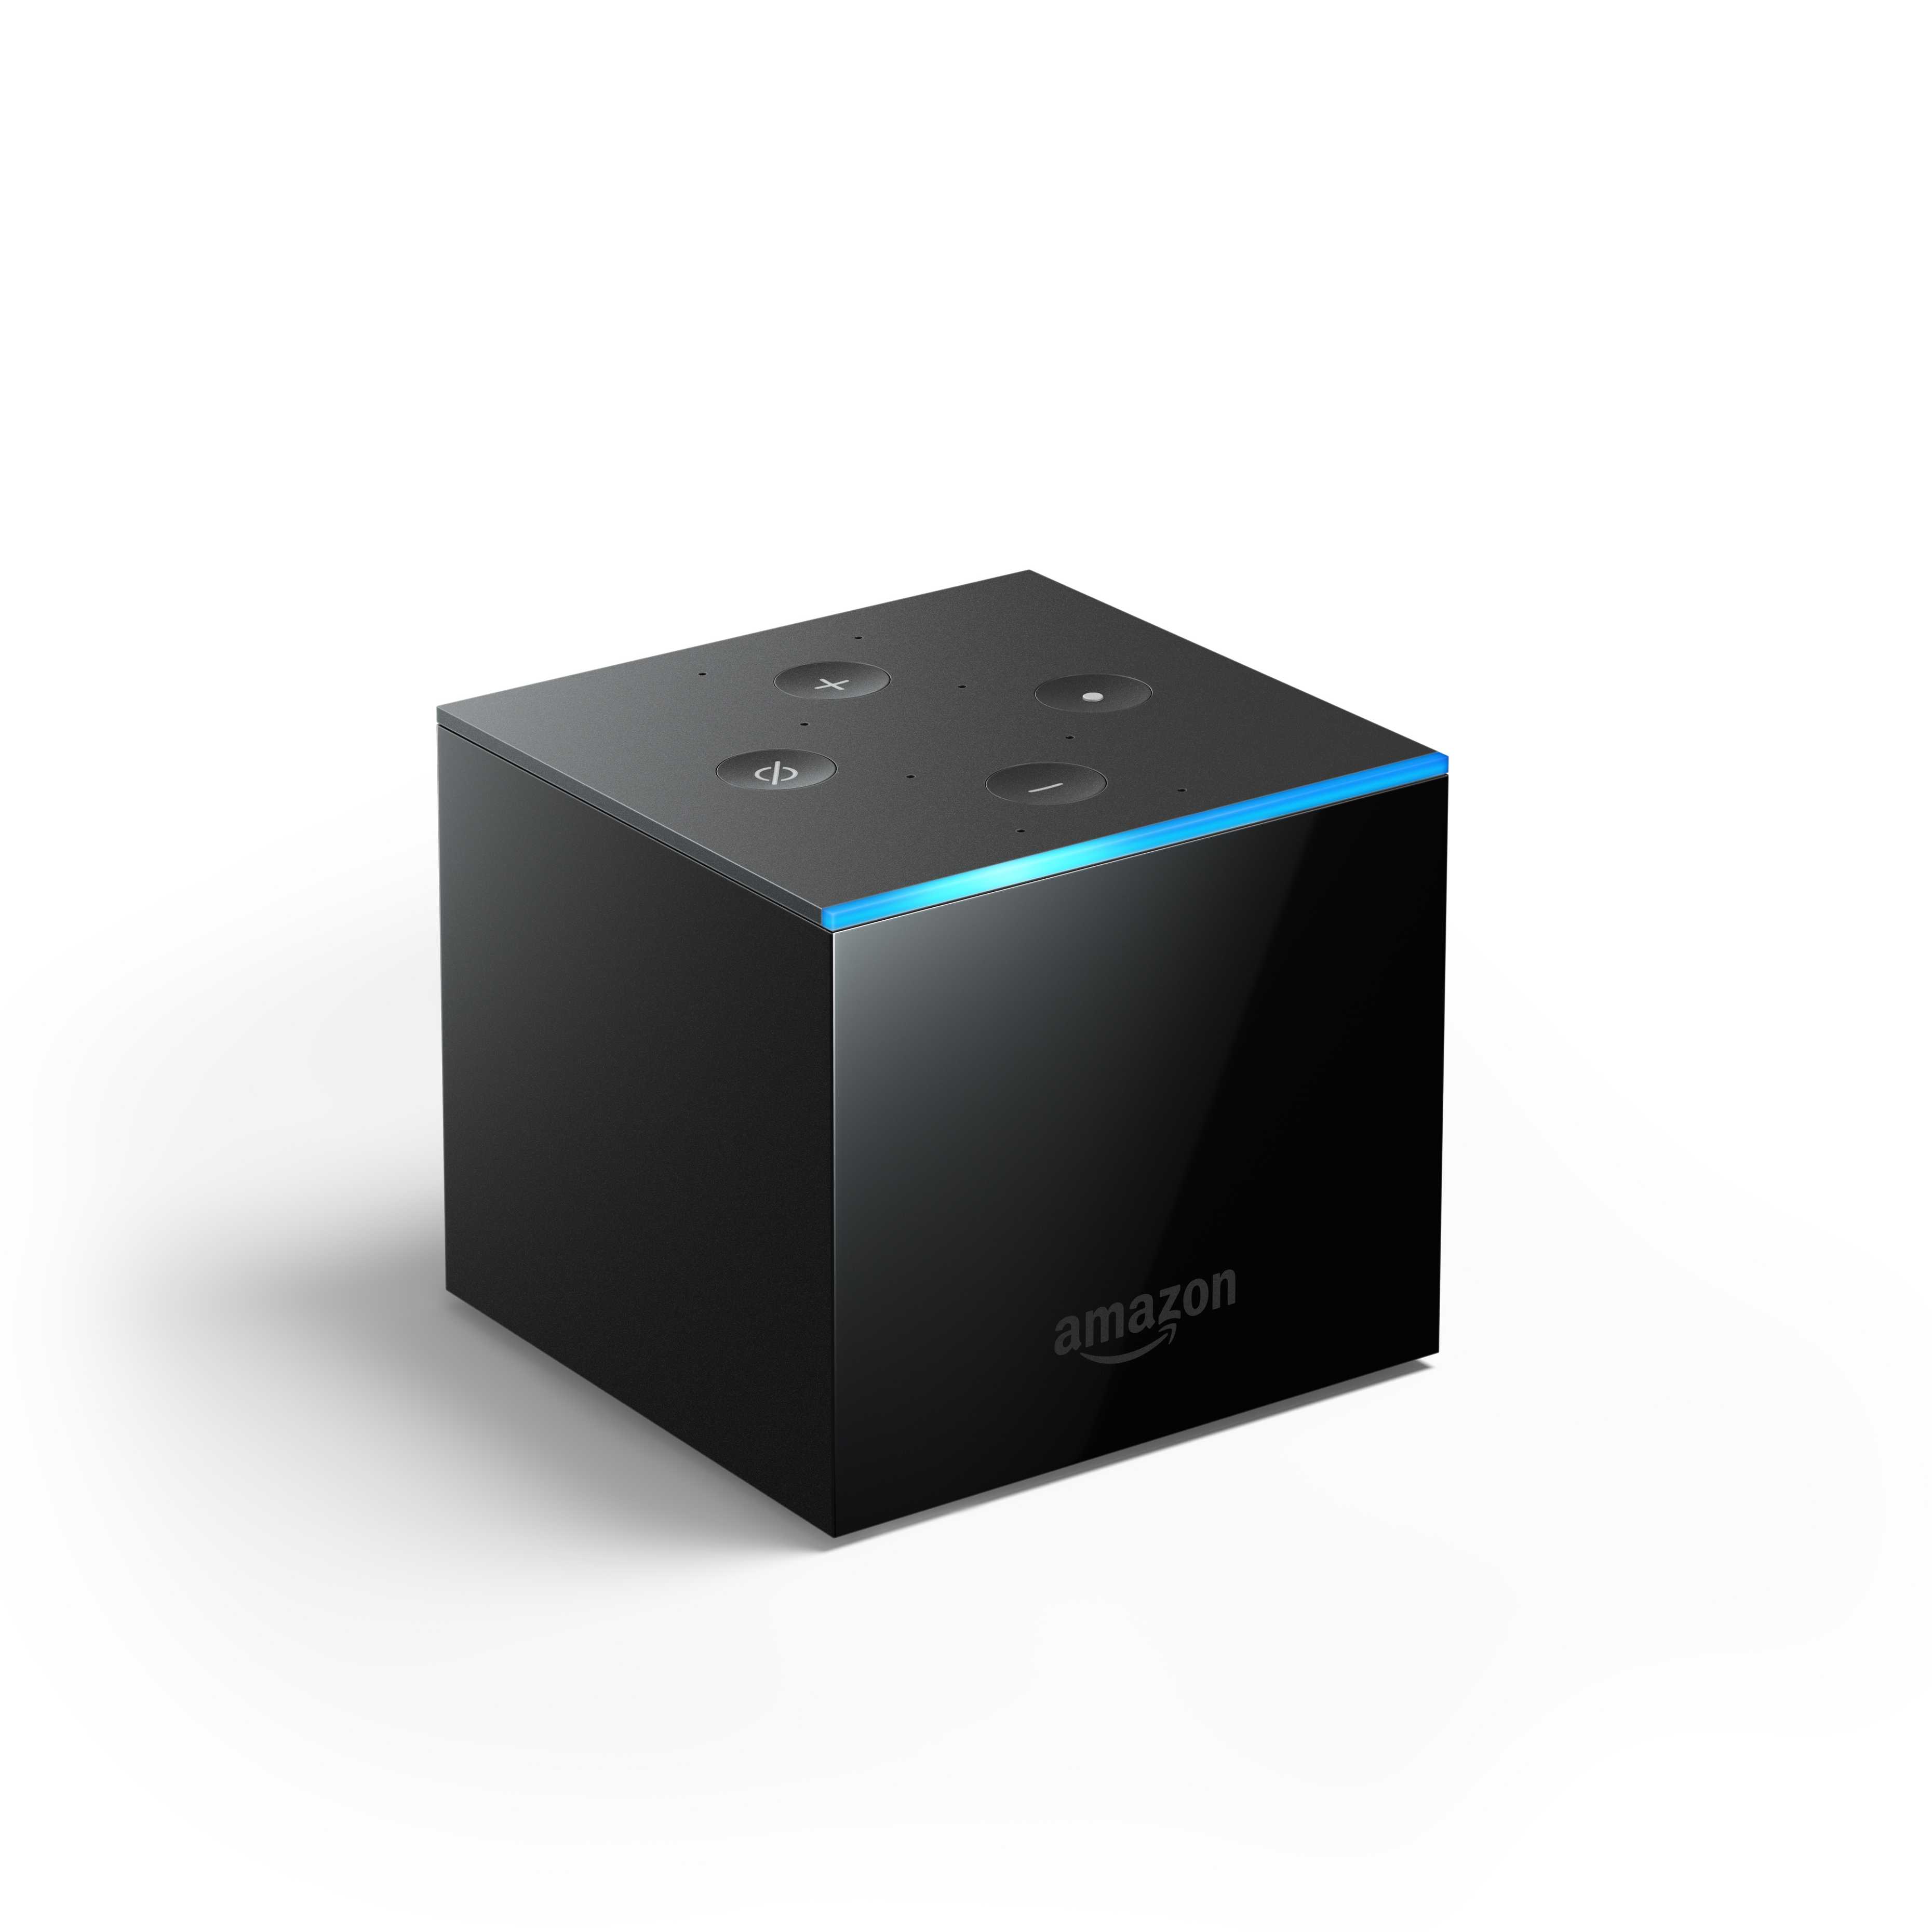 What you will get from this new Alexa enabled Amazon Fire TV cube